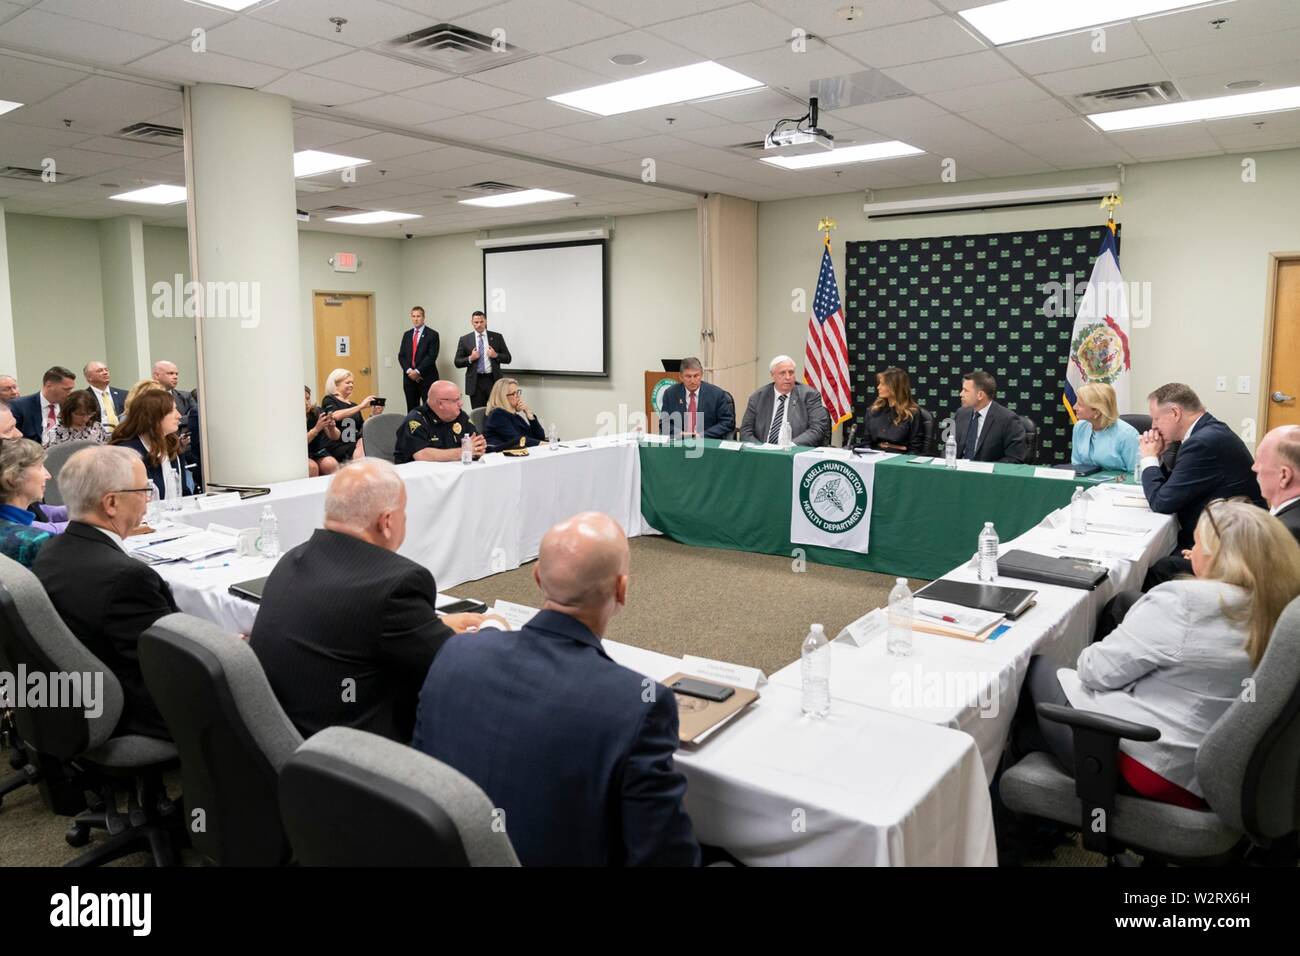 U.S First Lady Melania Trump participates in an opioid crisis roundtable discussion with state and local community leaders at the Cabell-Huntington Health Department July 8, 2019 in Huntington, West Virginia. Stock Photo